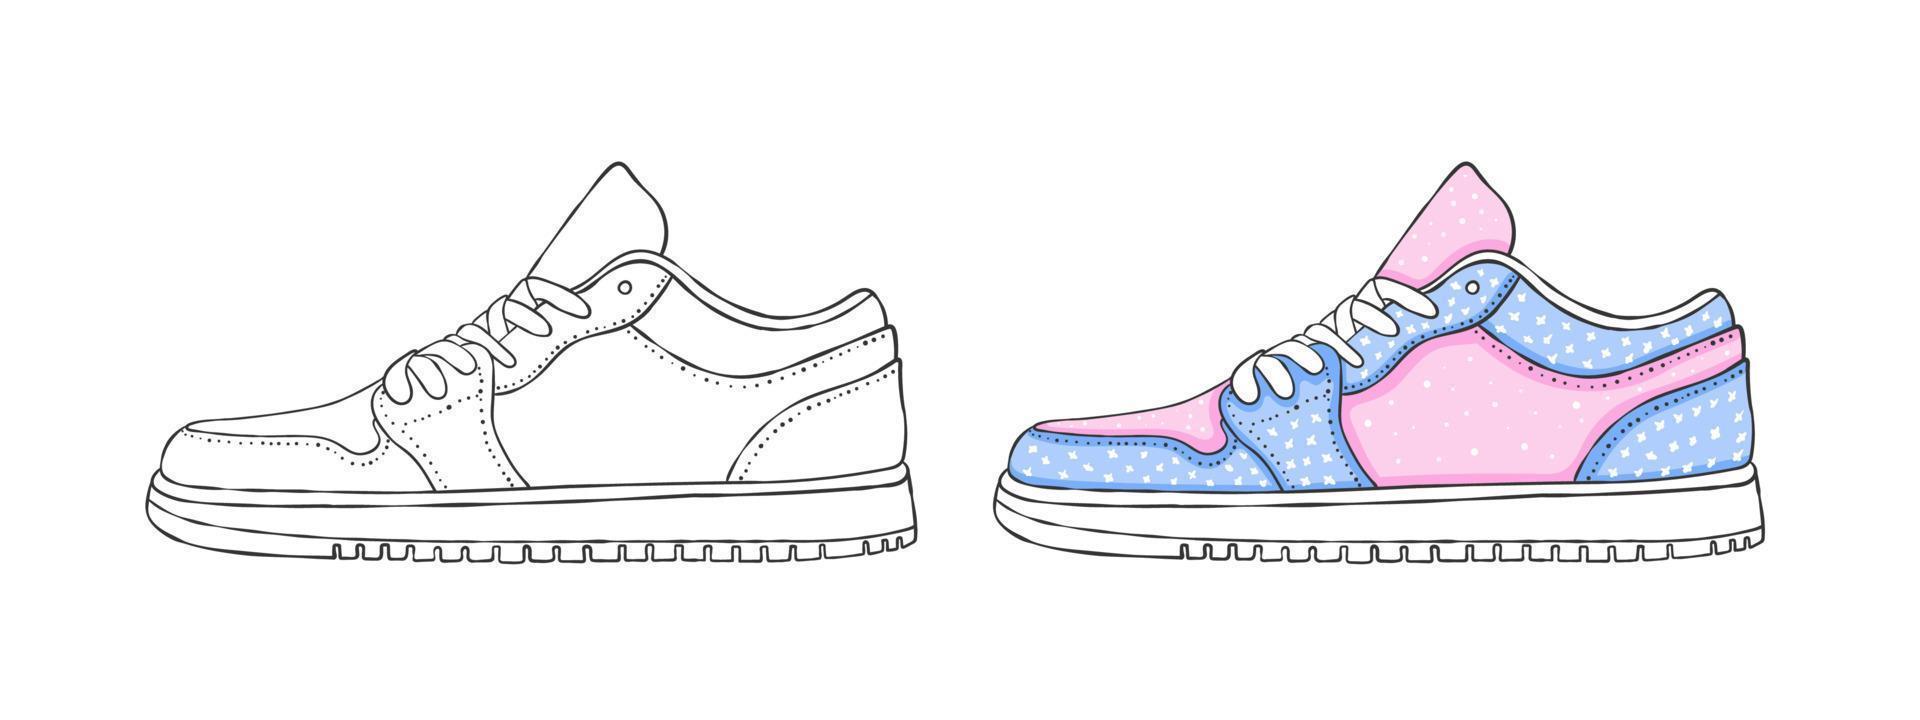 Hand drawn sneakers. Modern sneakers. Drawing Style Images. Vector illustration